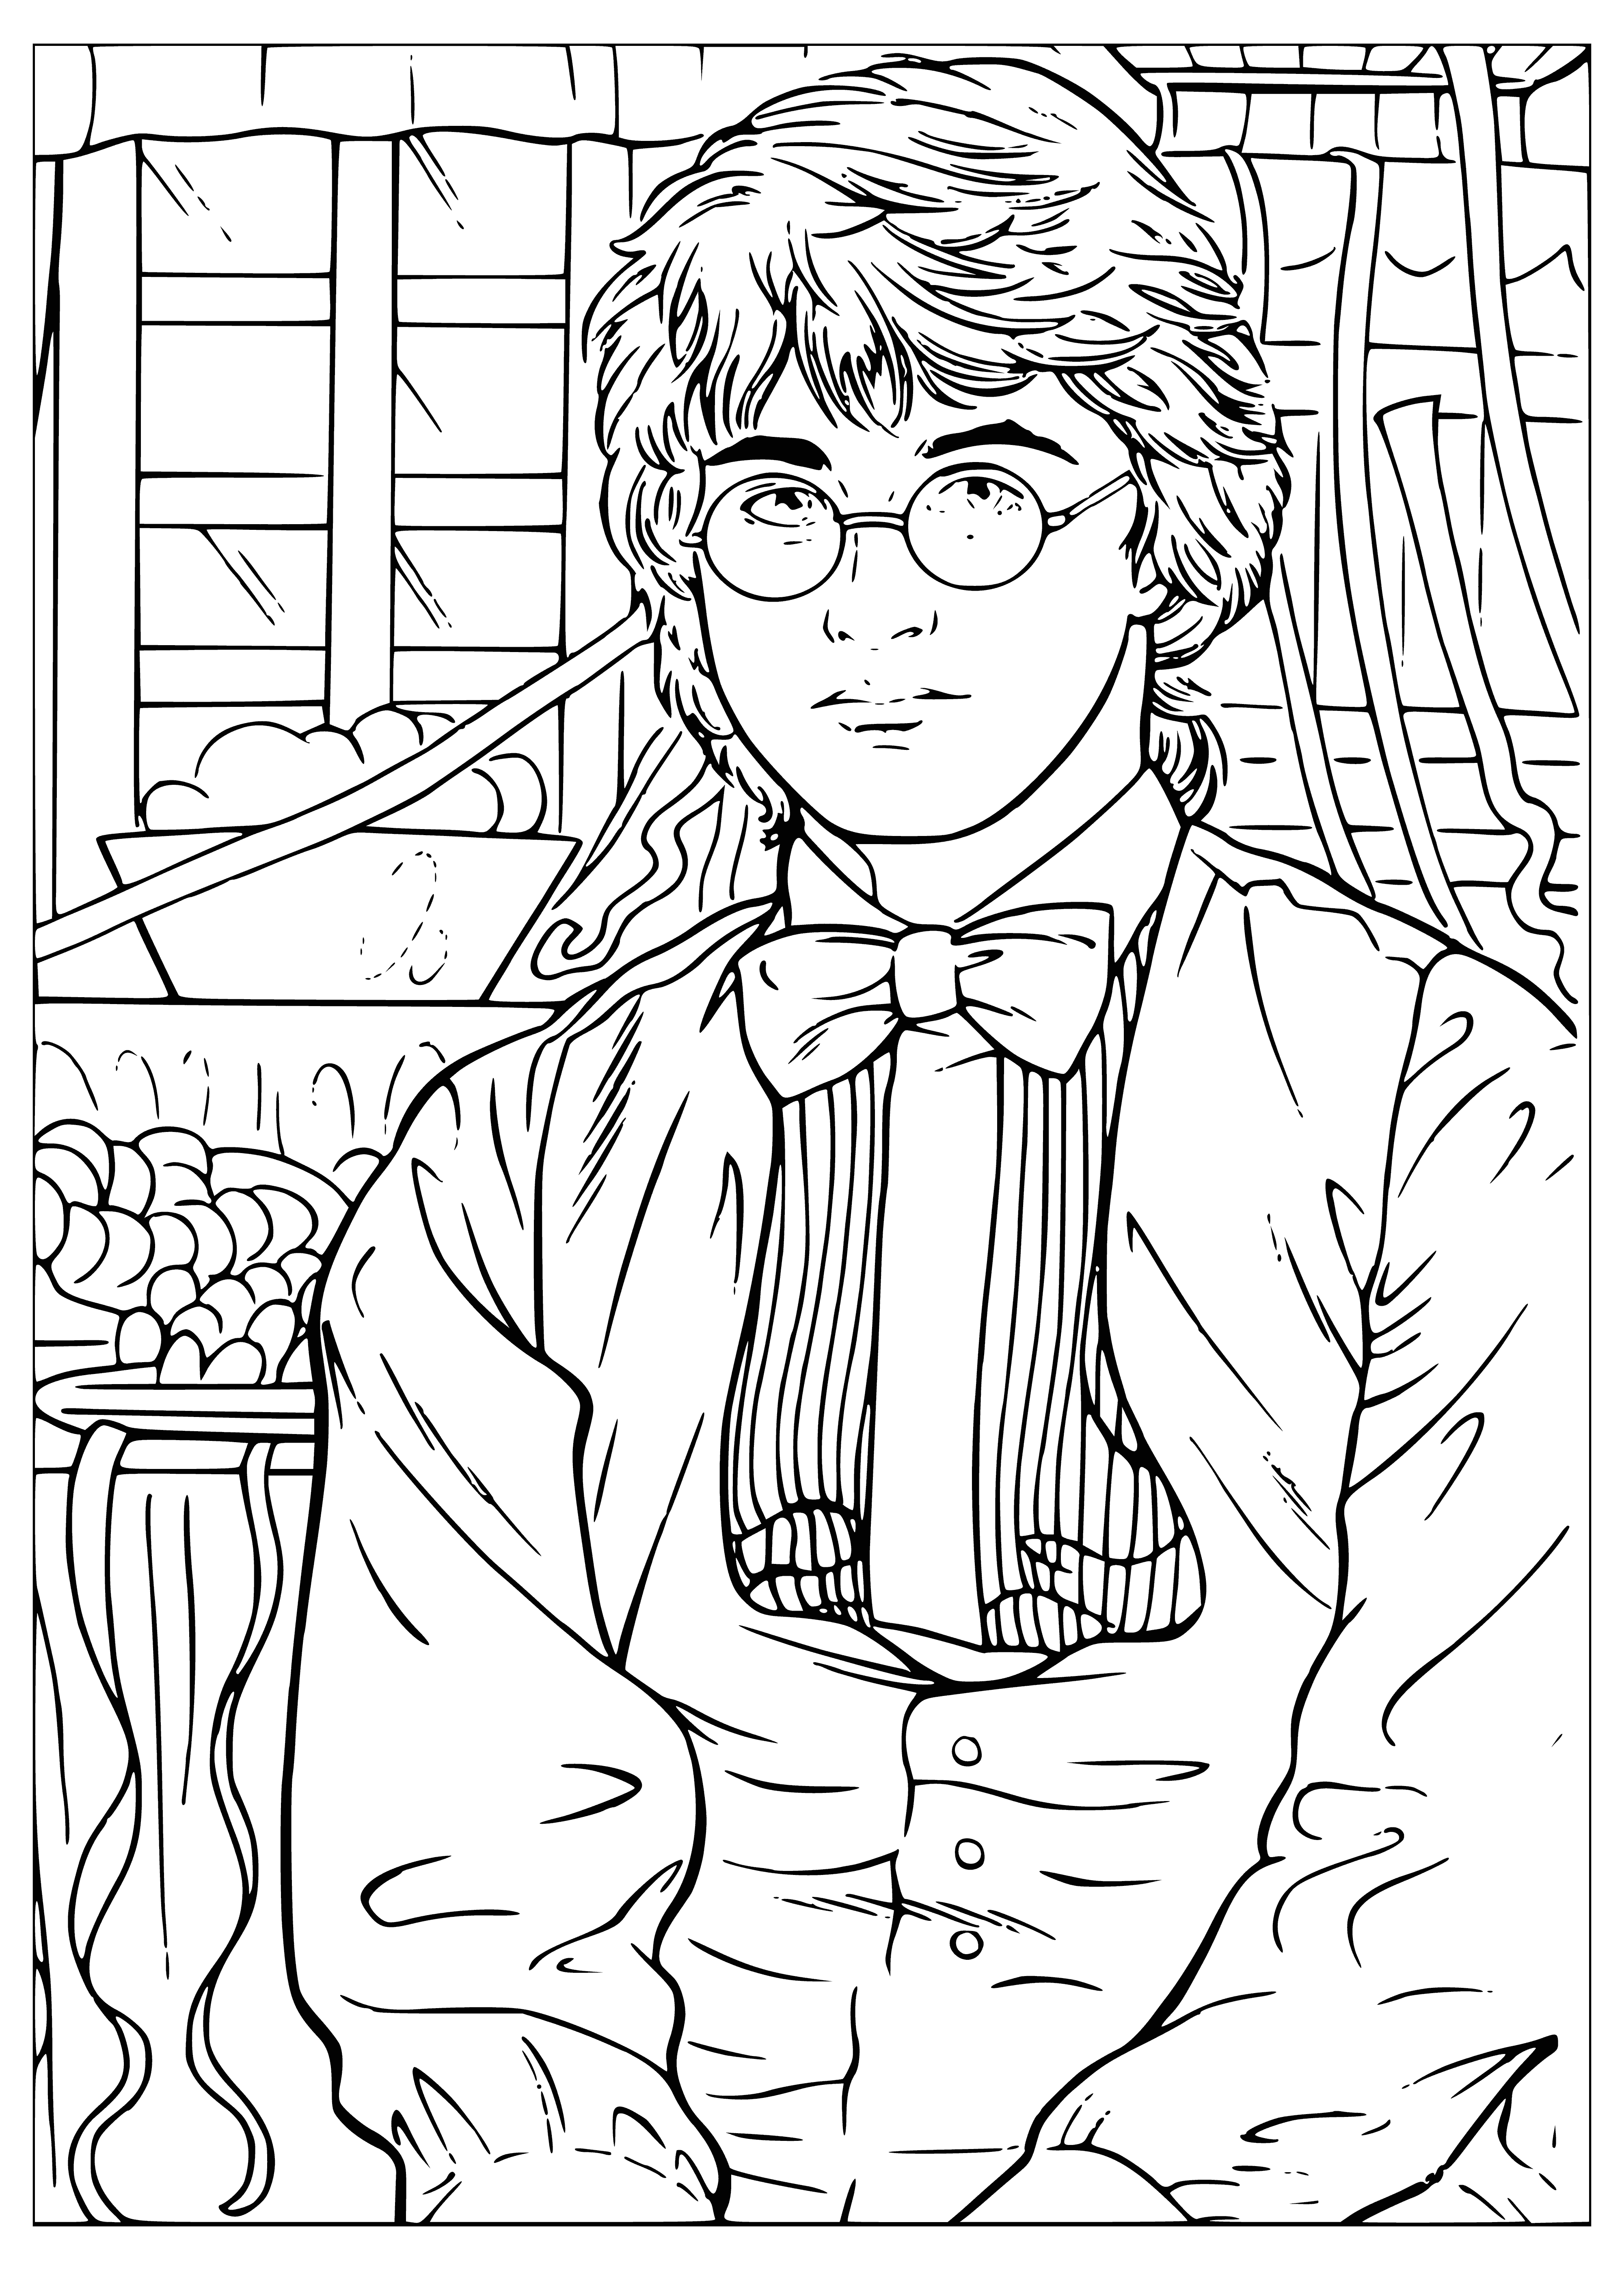 coloring page: A young boy with a lightening bolt scar on his forehead stands in front of Platform 9 3/4, ready for an adventure.